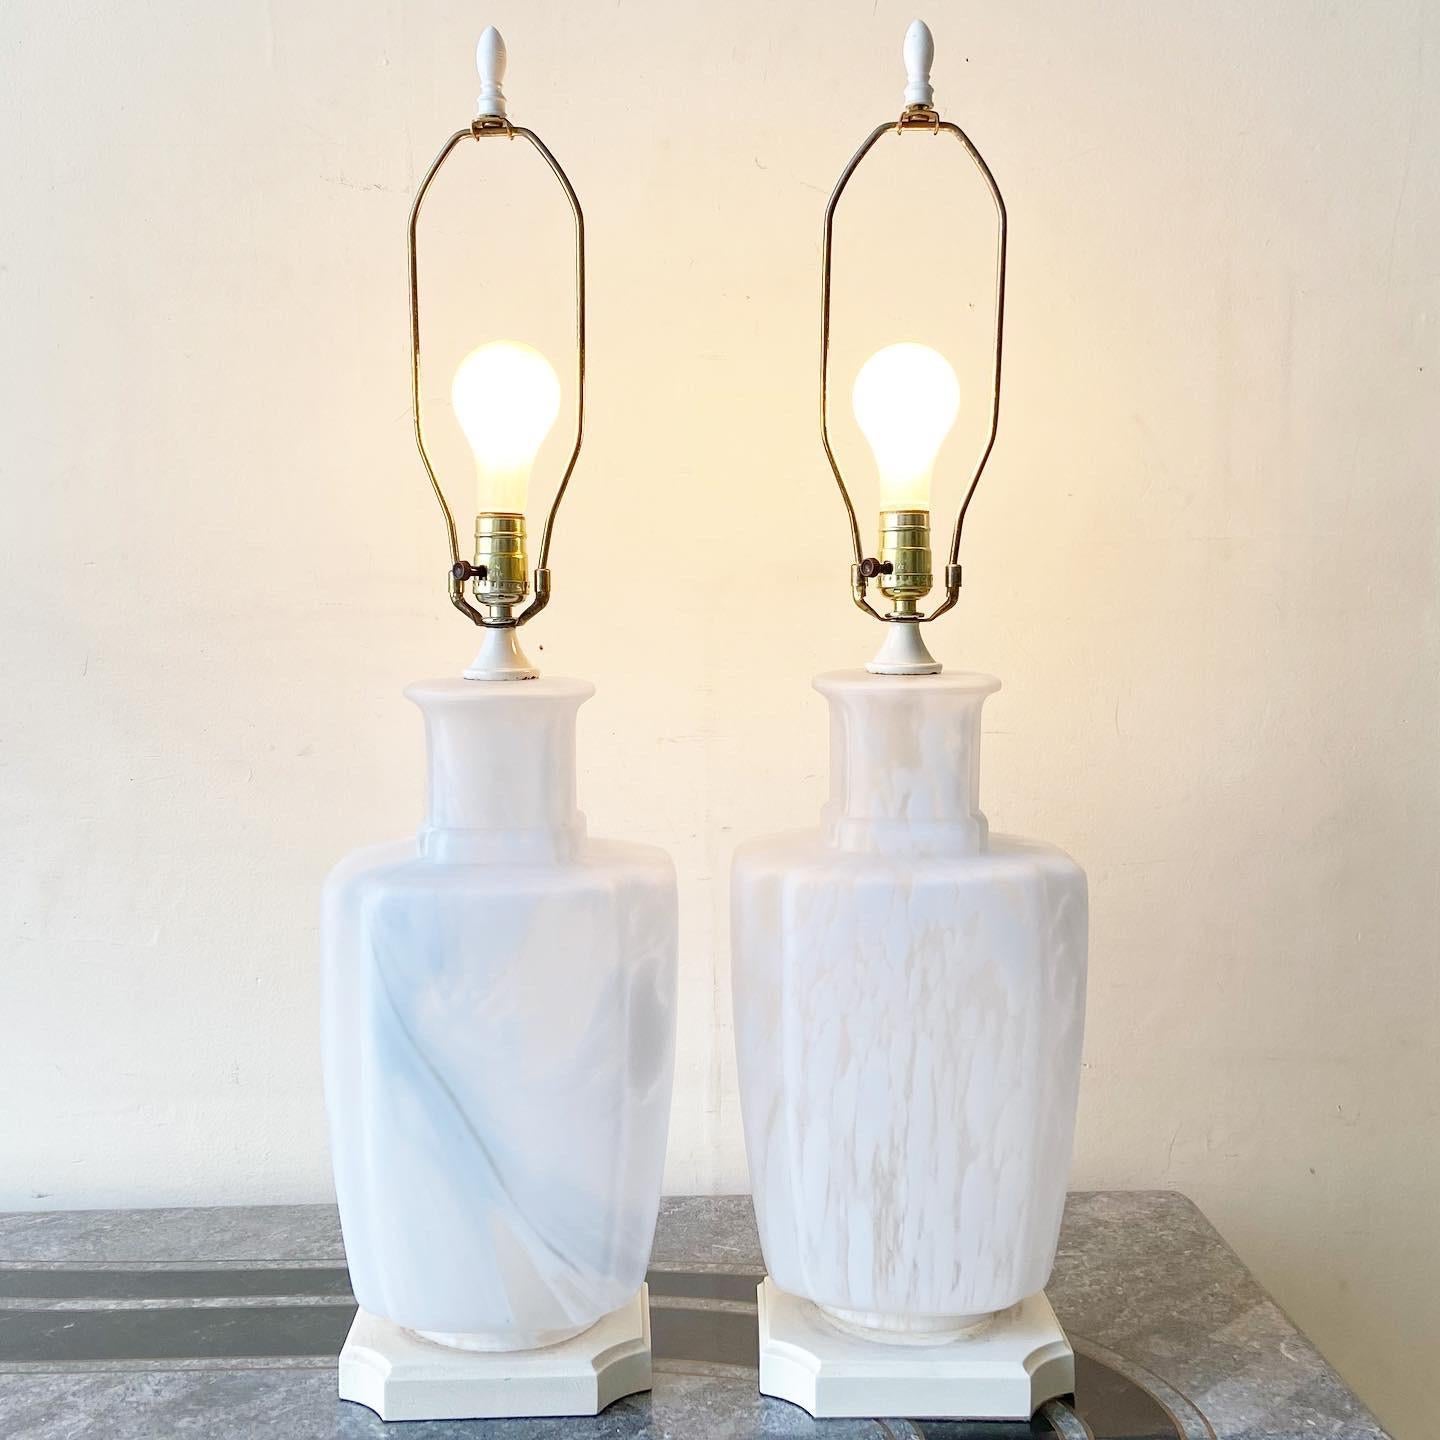 Incredible pair of mottles Murano style frosted glass table lamps. Each lamp has 3 light settings: base light, top bulb, and both.
 